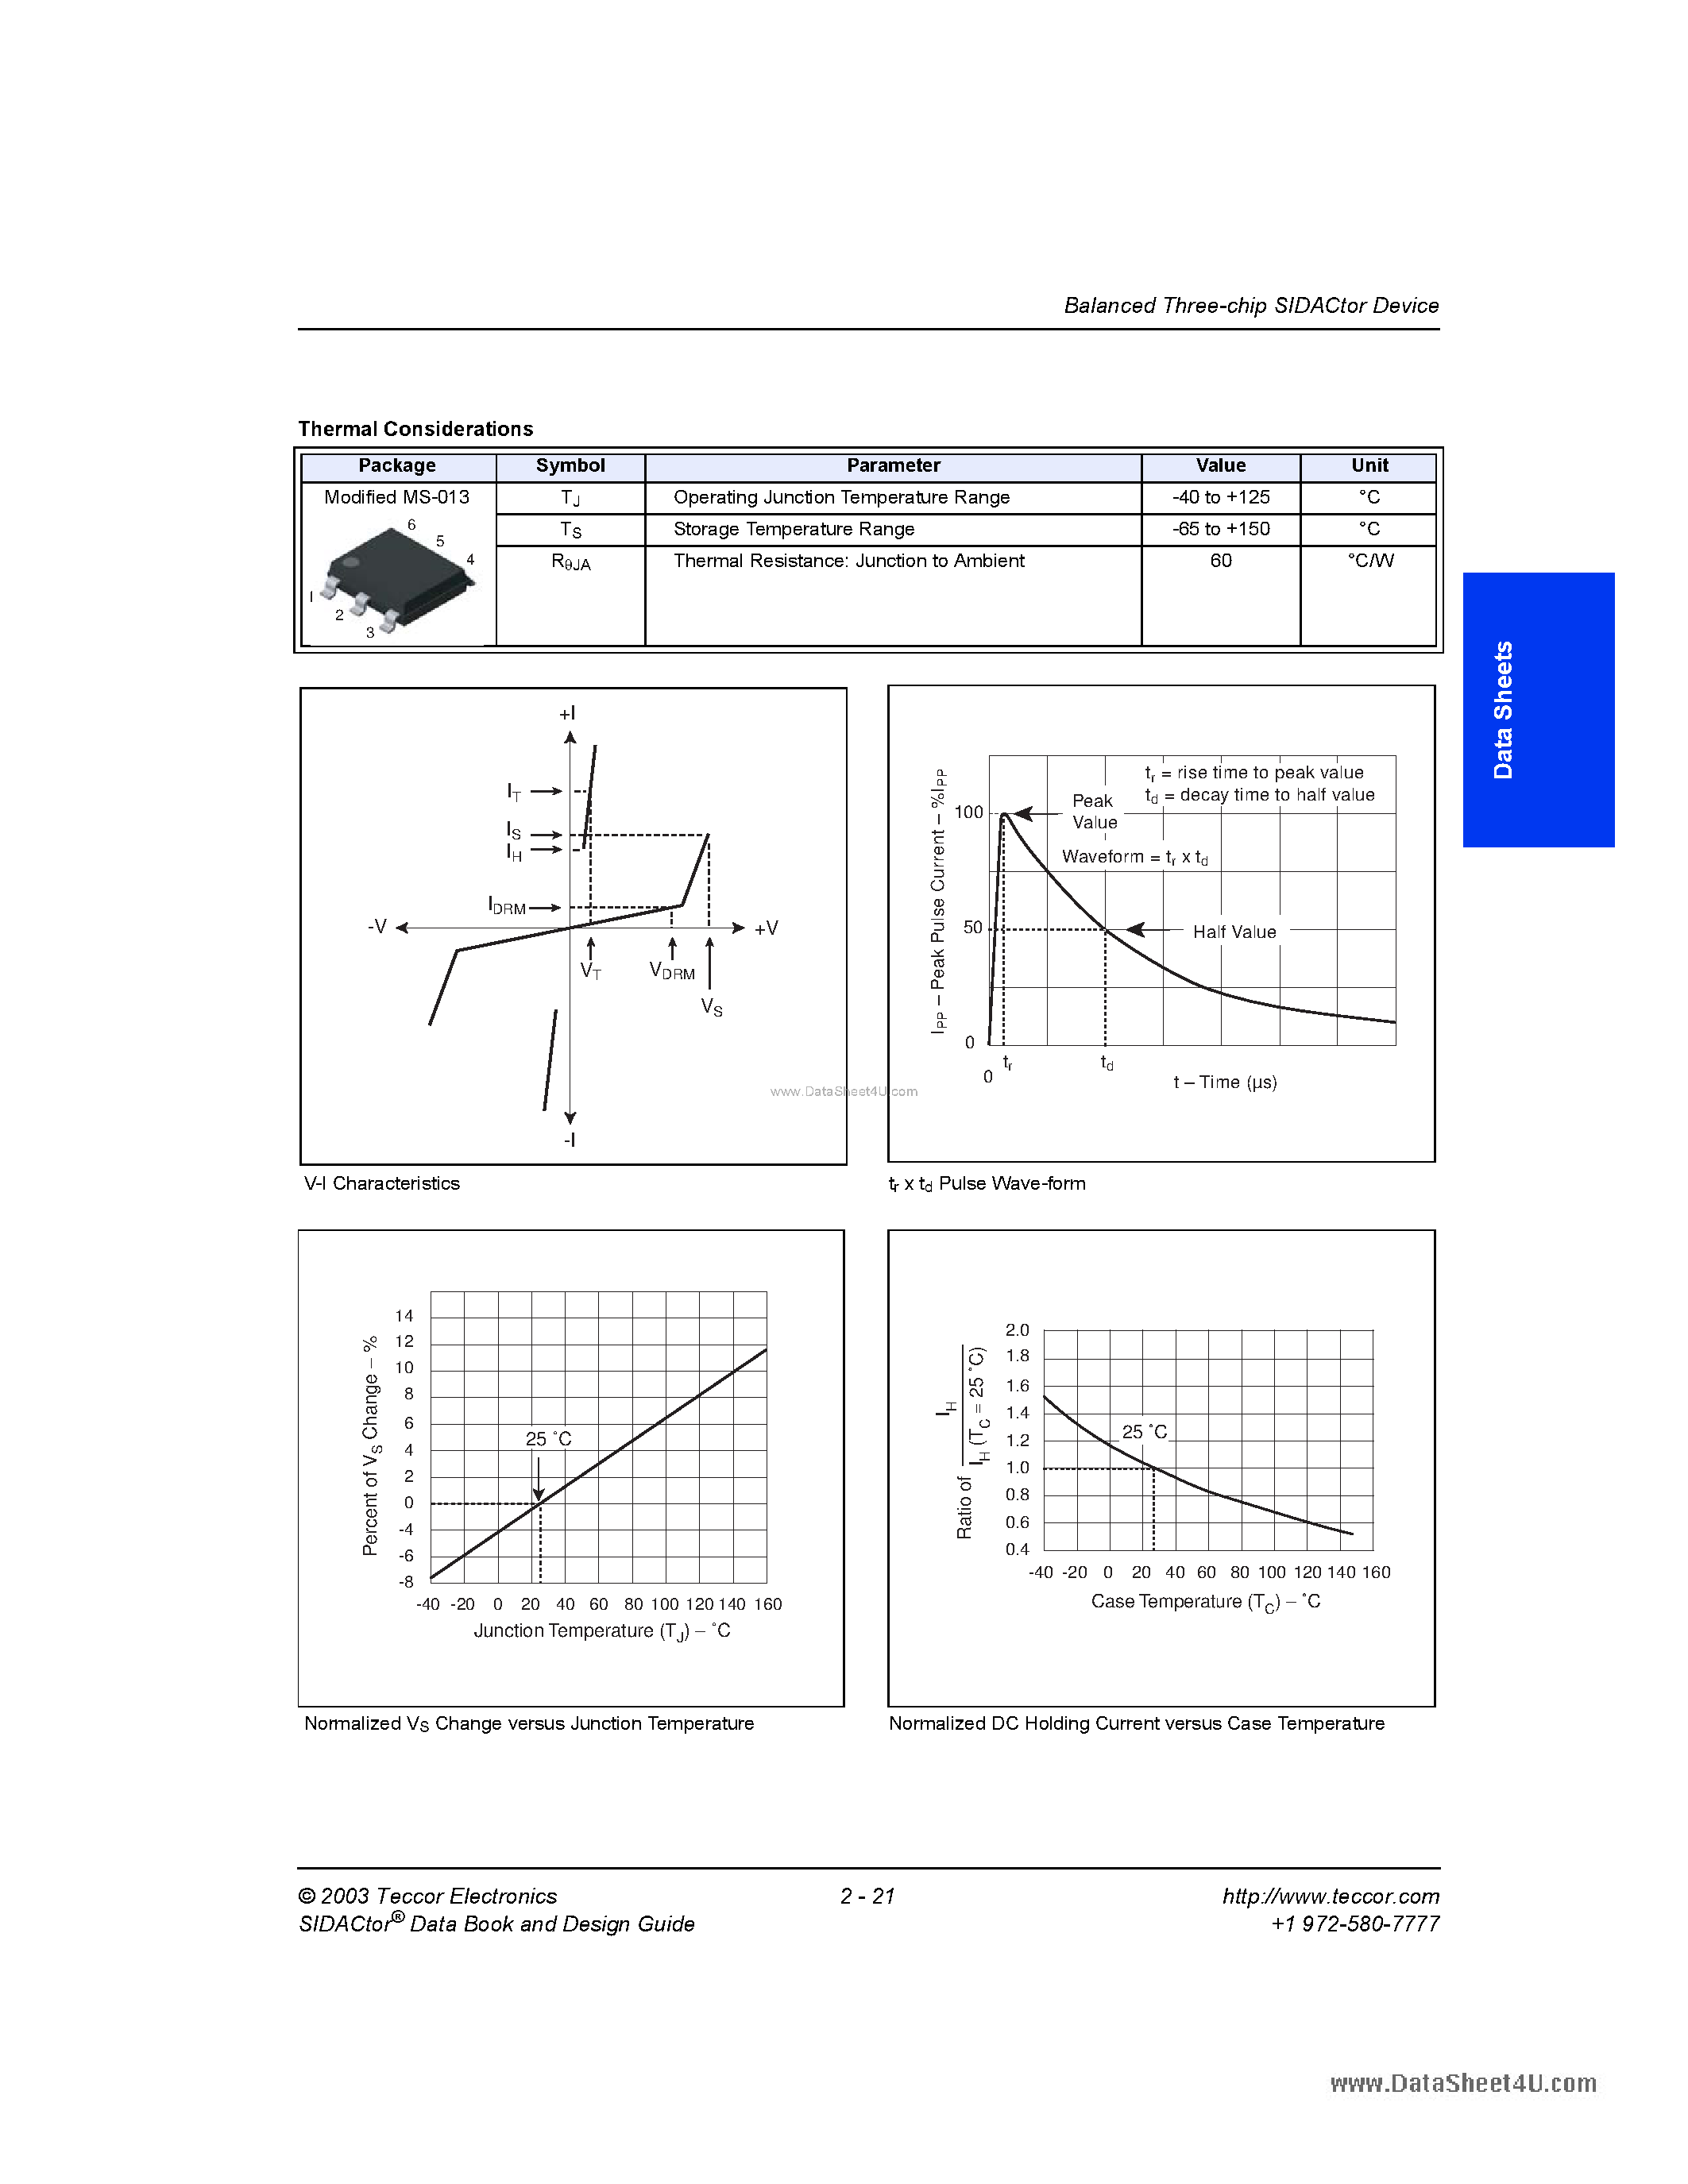 Datasheet A2106U - solid state crowbar devices page 2